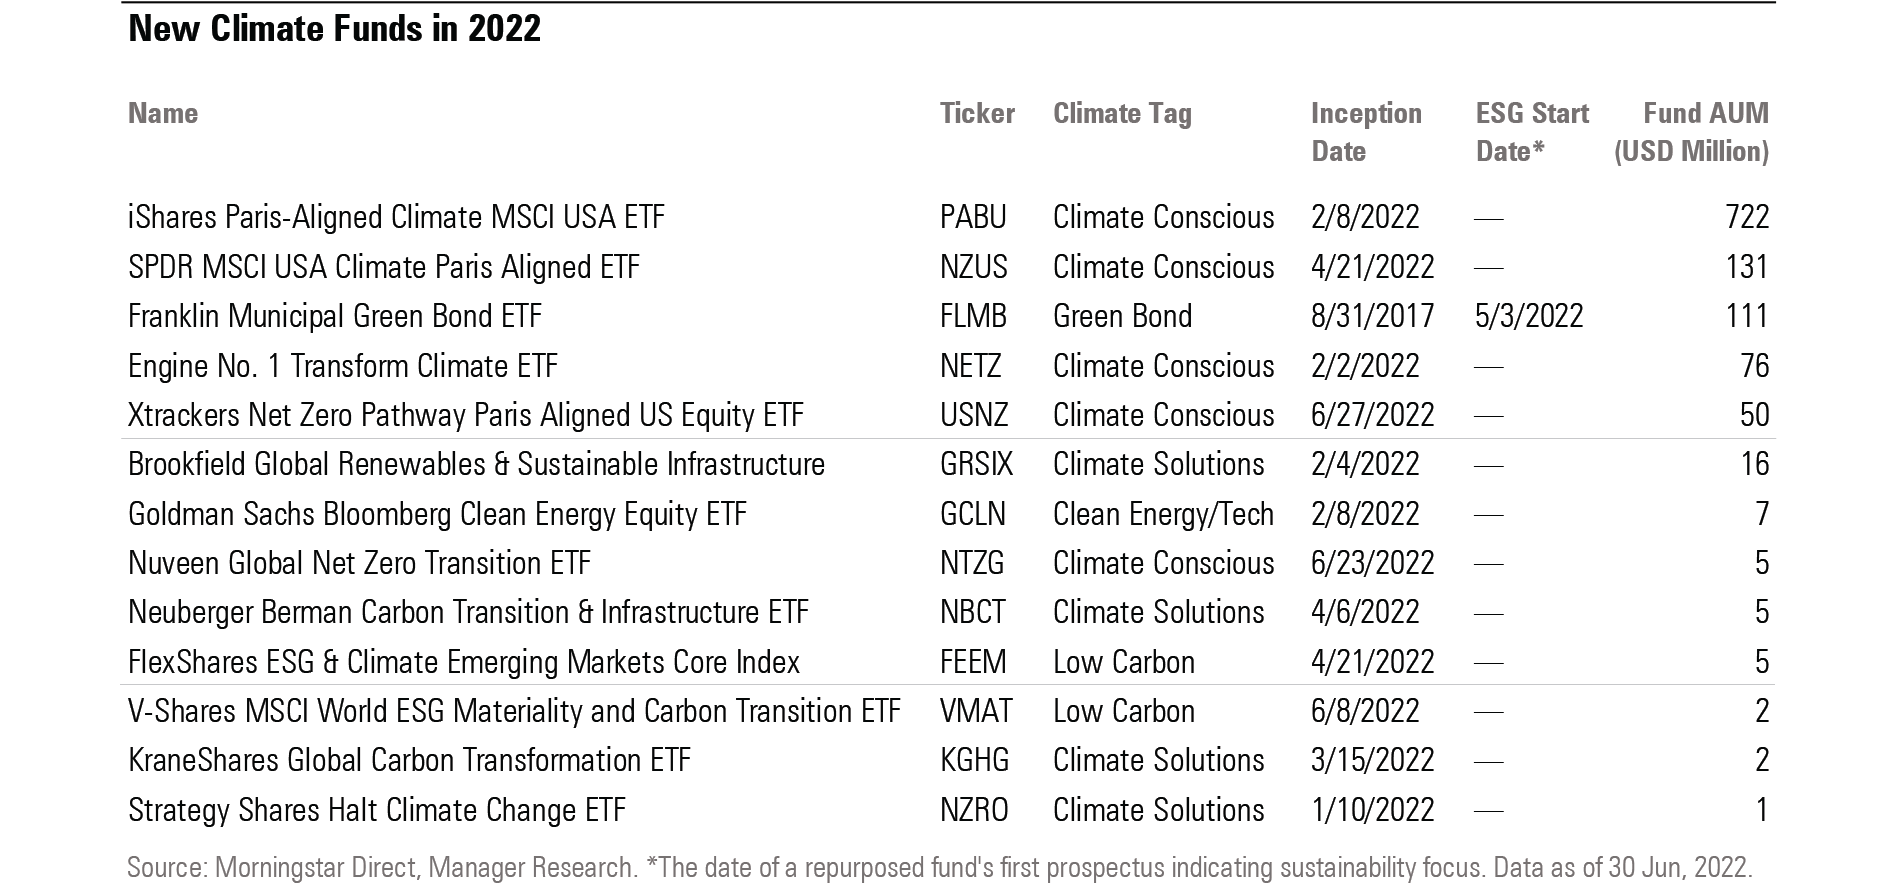 2Q22 New Climate Funds